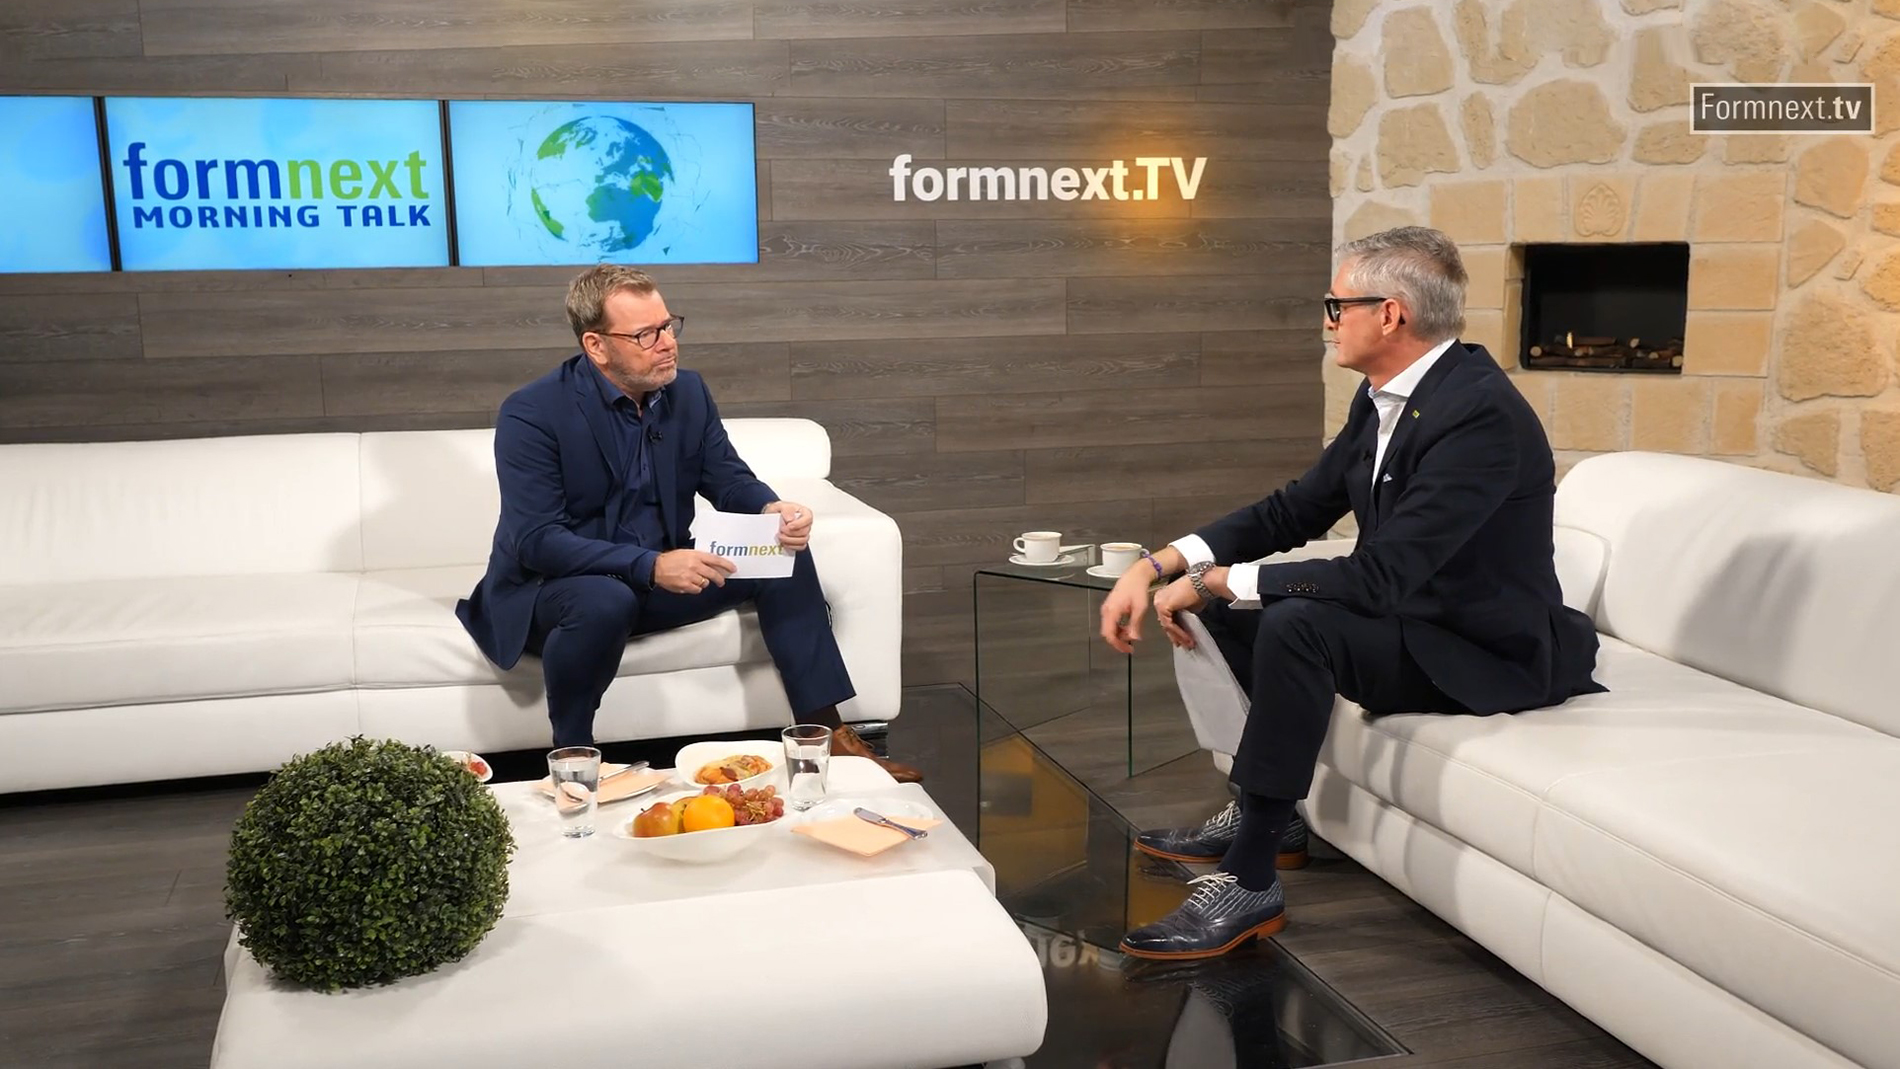 Formnext.TV – At the show